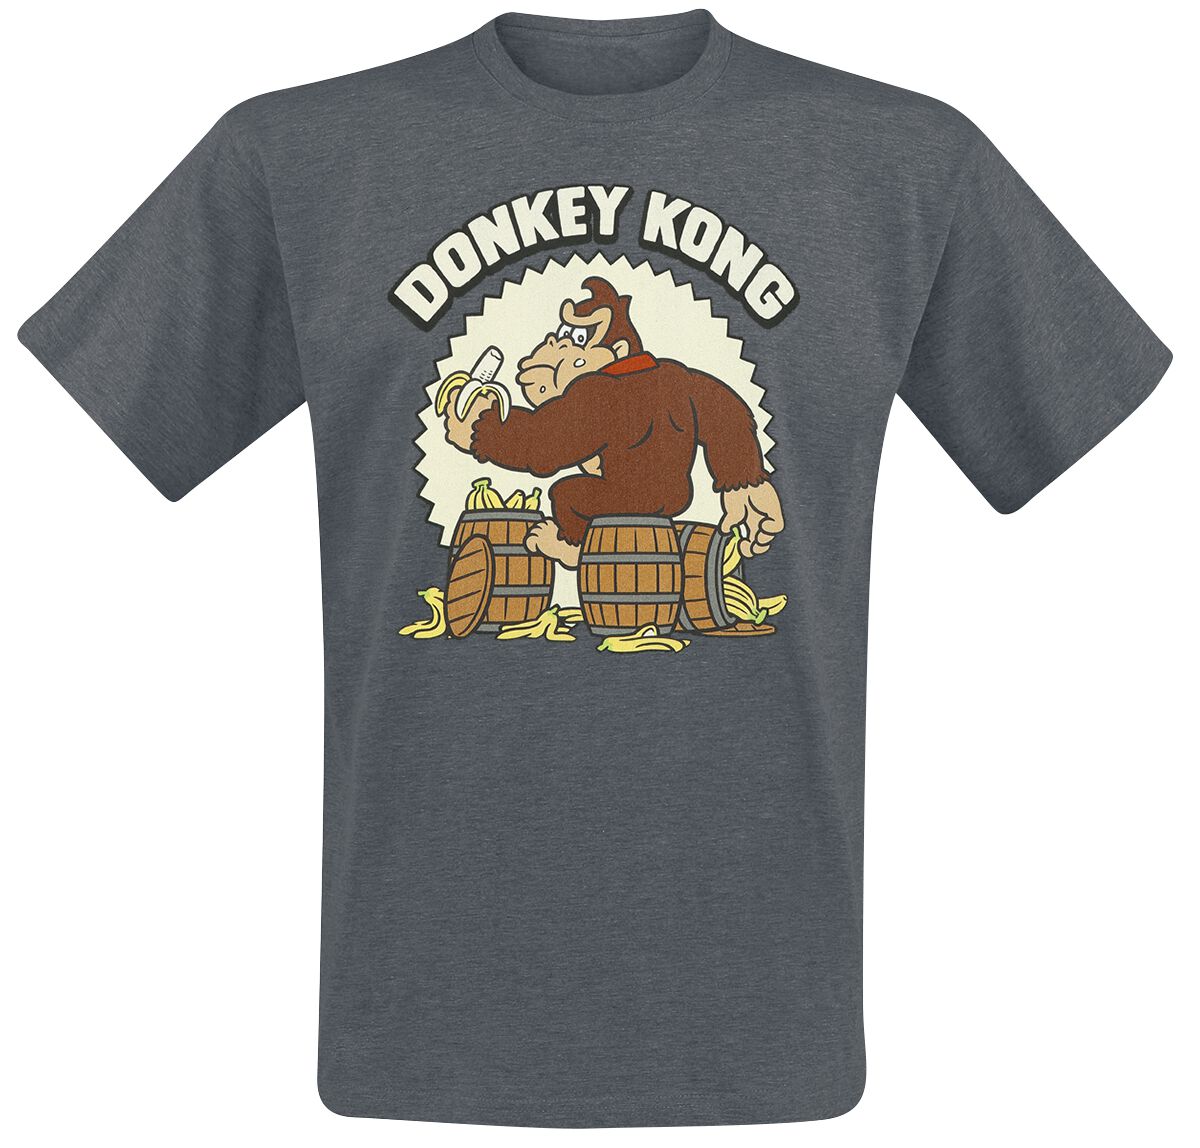 Super Mario - Donkey Kong - T-Shirt Manches courtes - Homme 